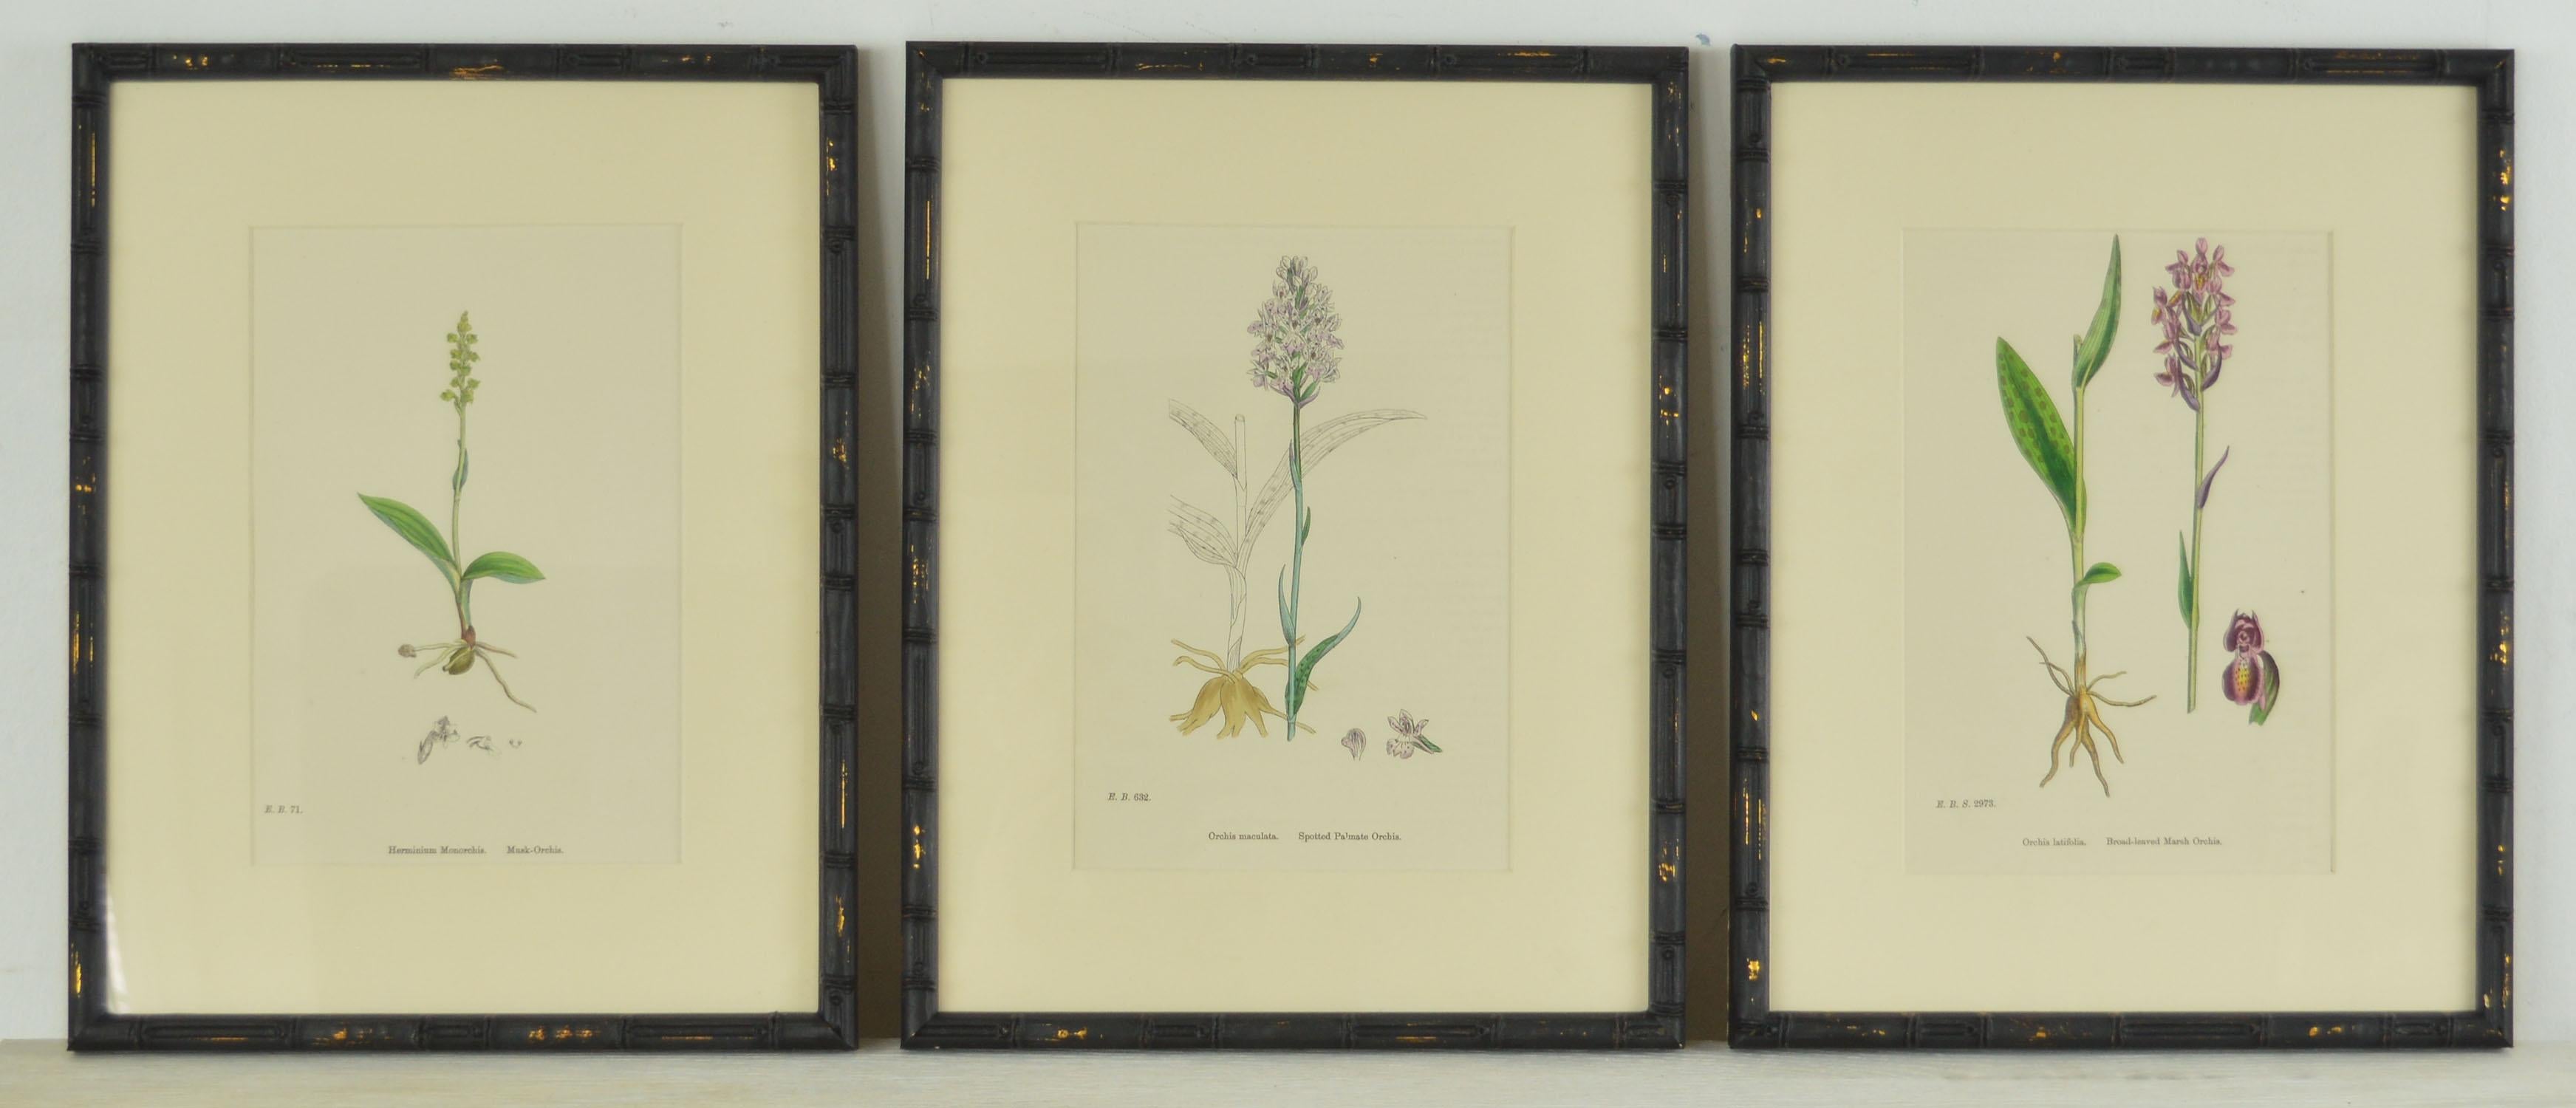 Wonderful set of 24 prints of the many species of orchids

Lithographs after the original drawings by Hooker.

Original color.

Published, circa 1850

Presented in our own custom ebonized faux bamboo frames.















